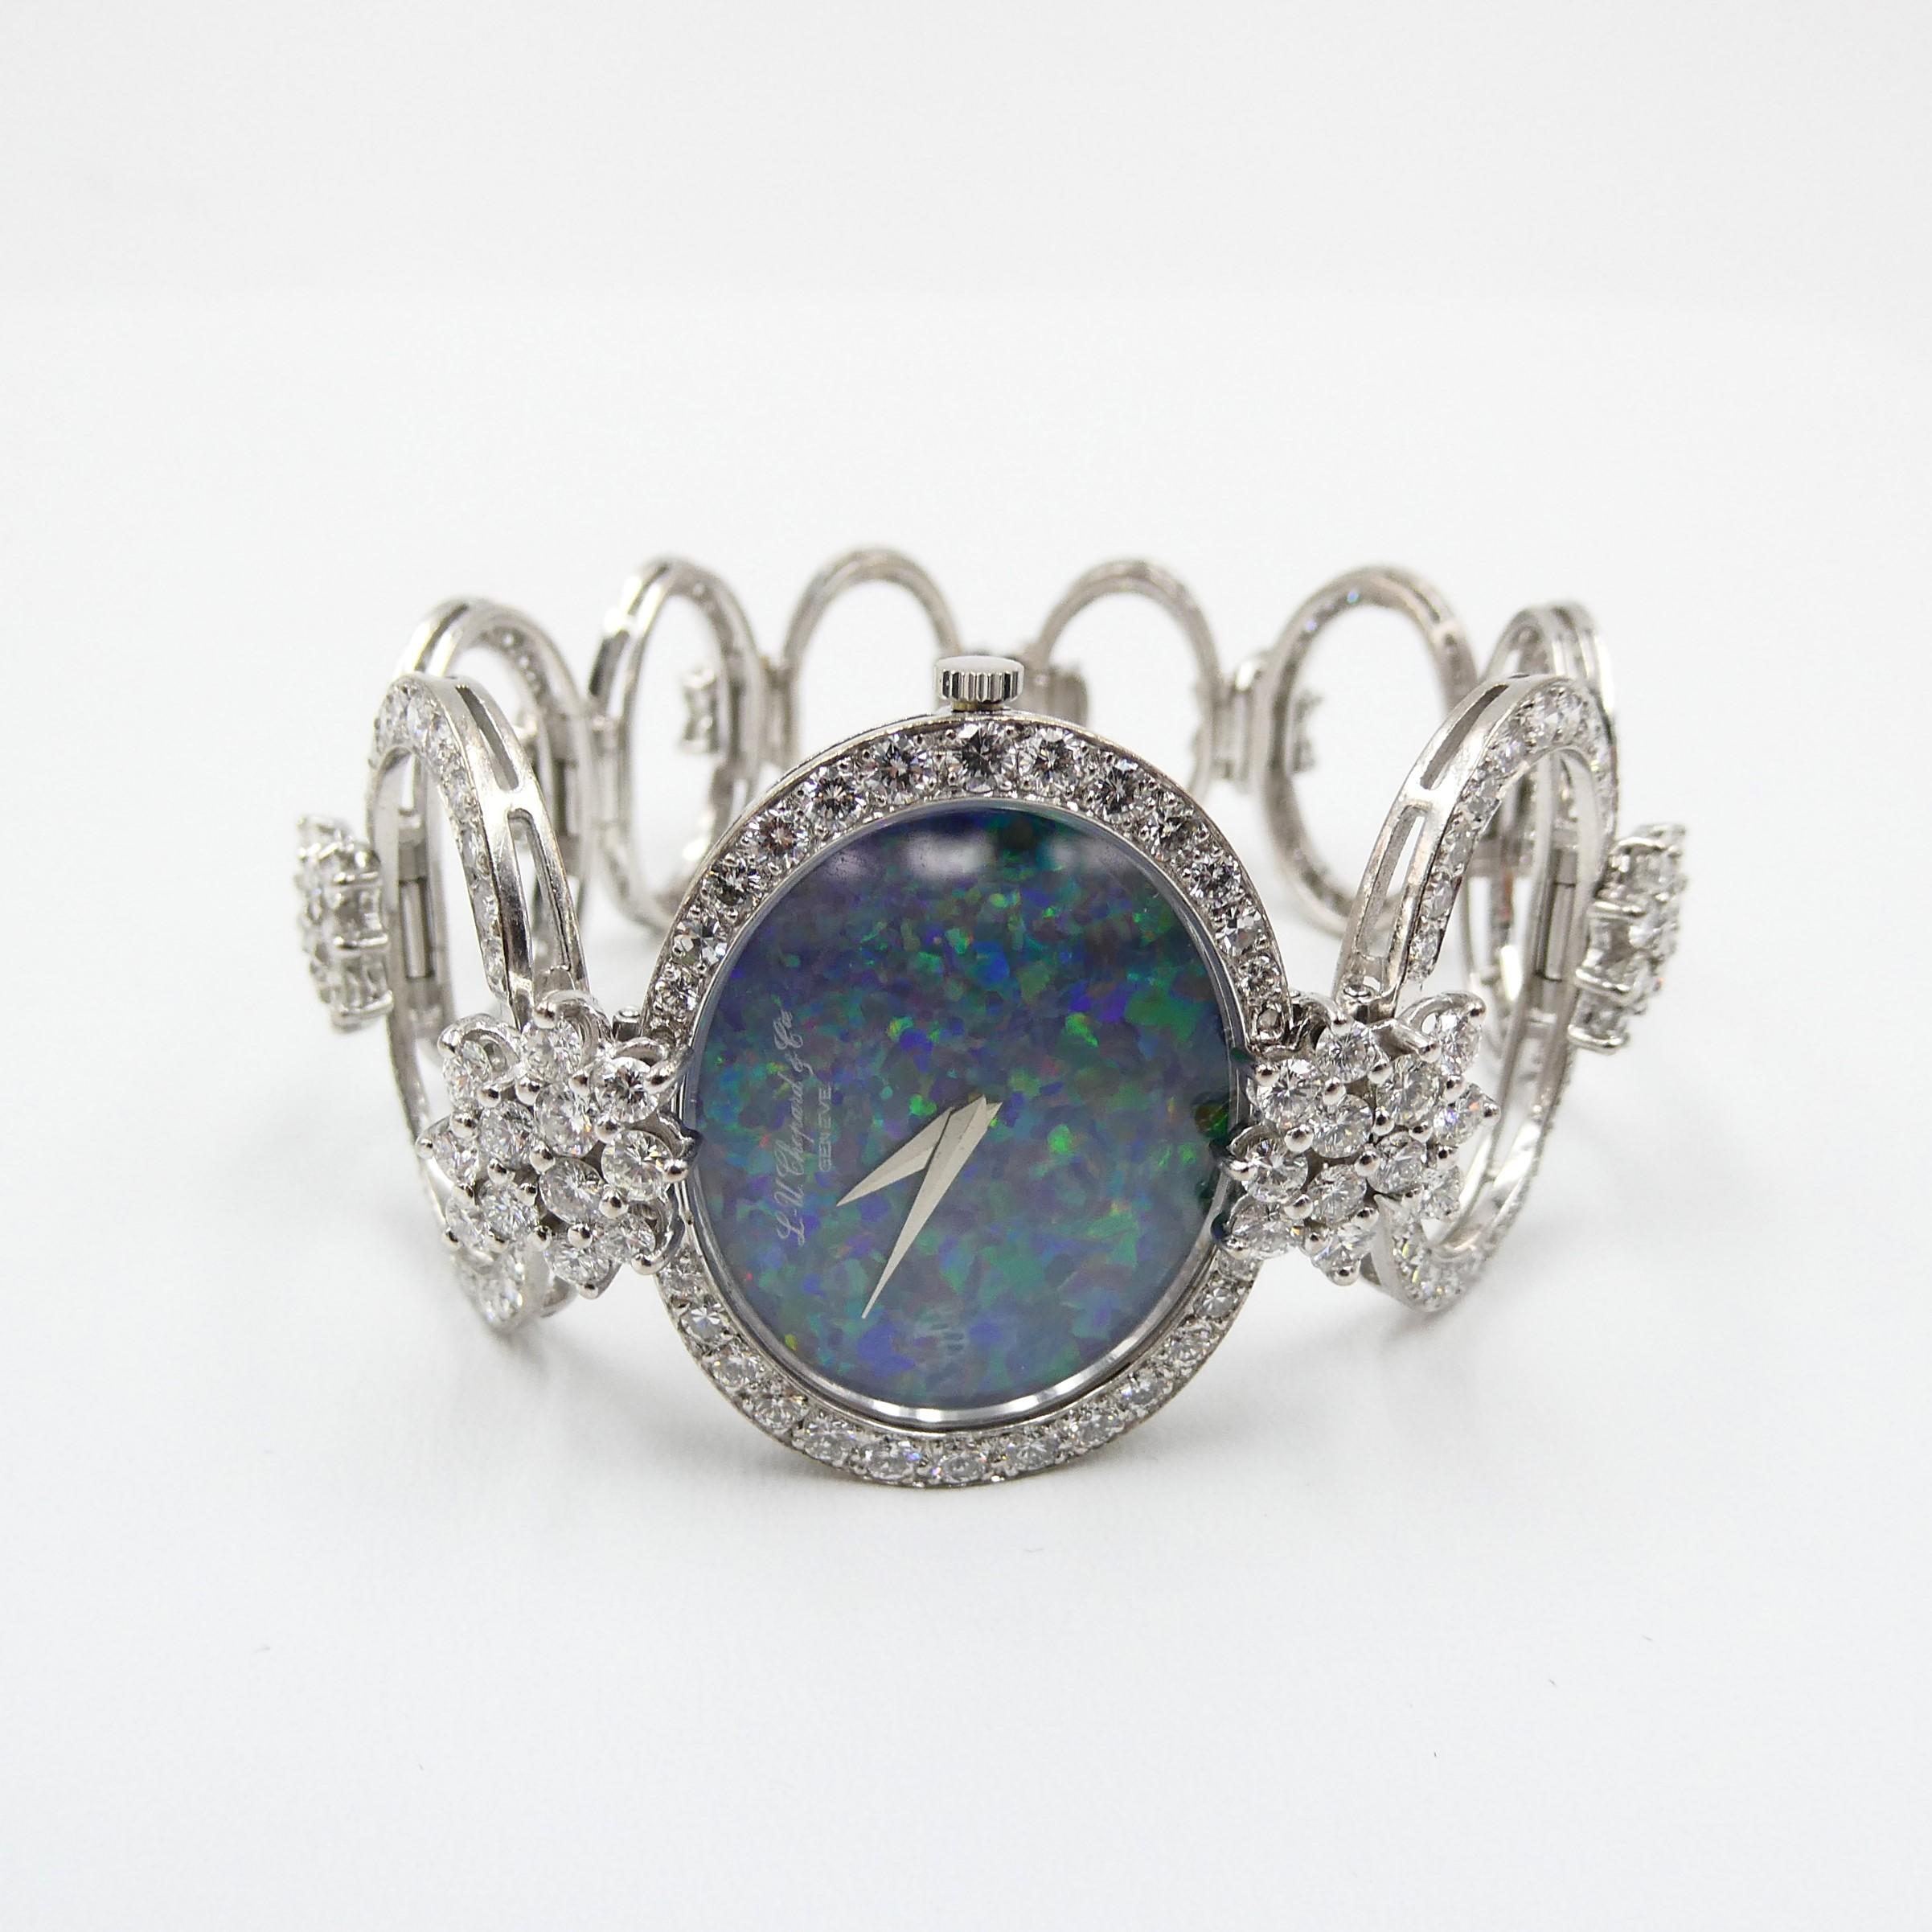 Chopard Watch with Black Opal and Diamond in 18 Karat White Gold 3